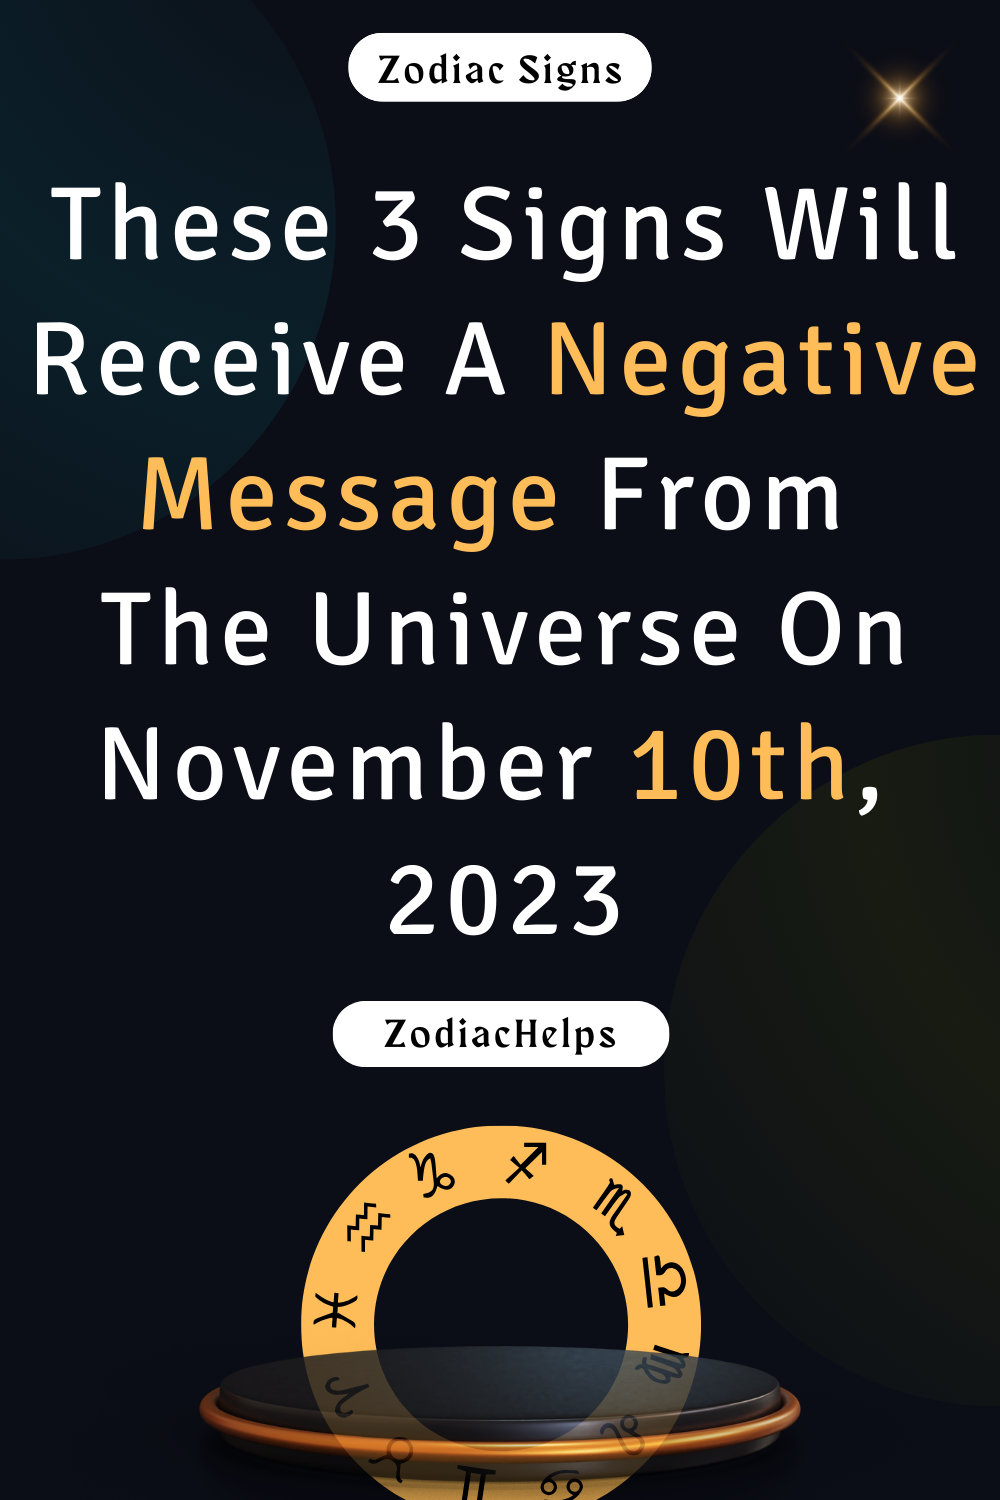 These 3 Signs Will Receive A Negative Message From The Universe On November 10, 2023